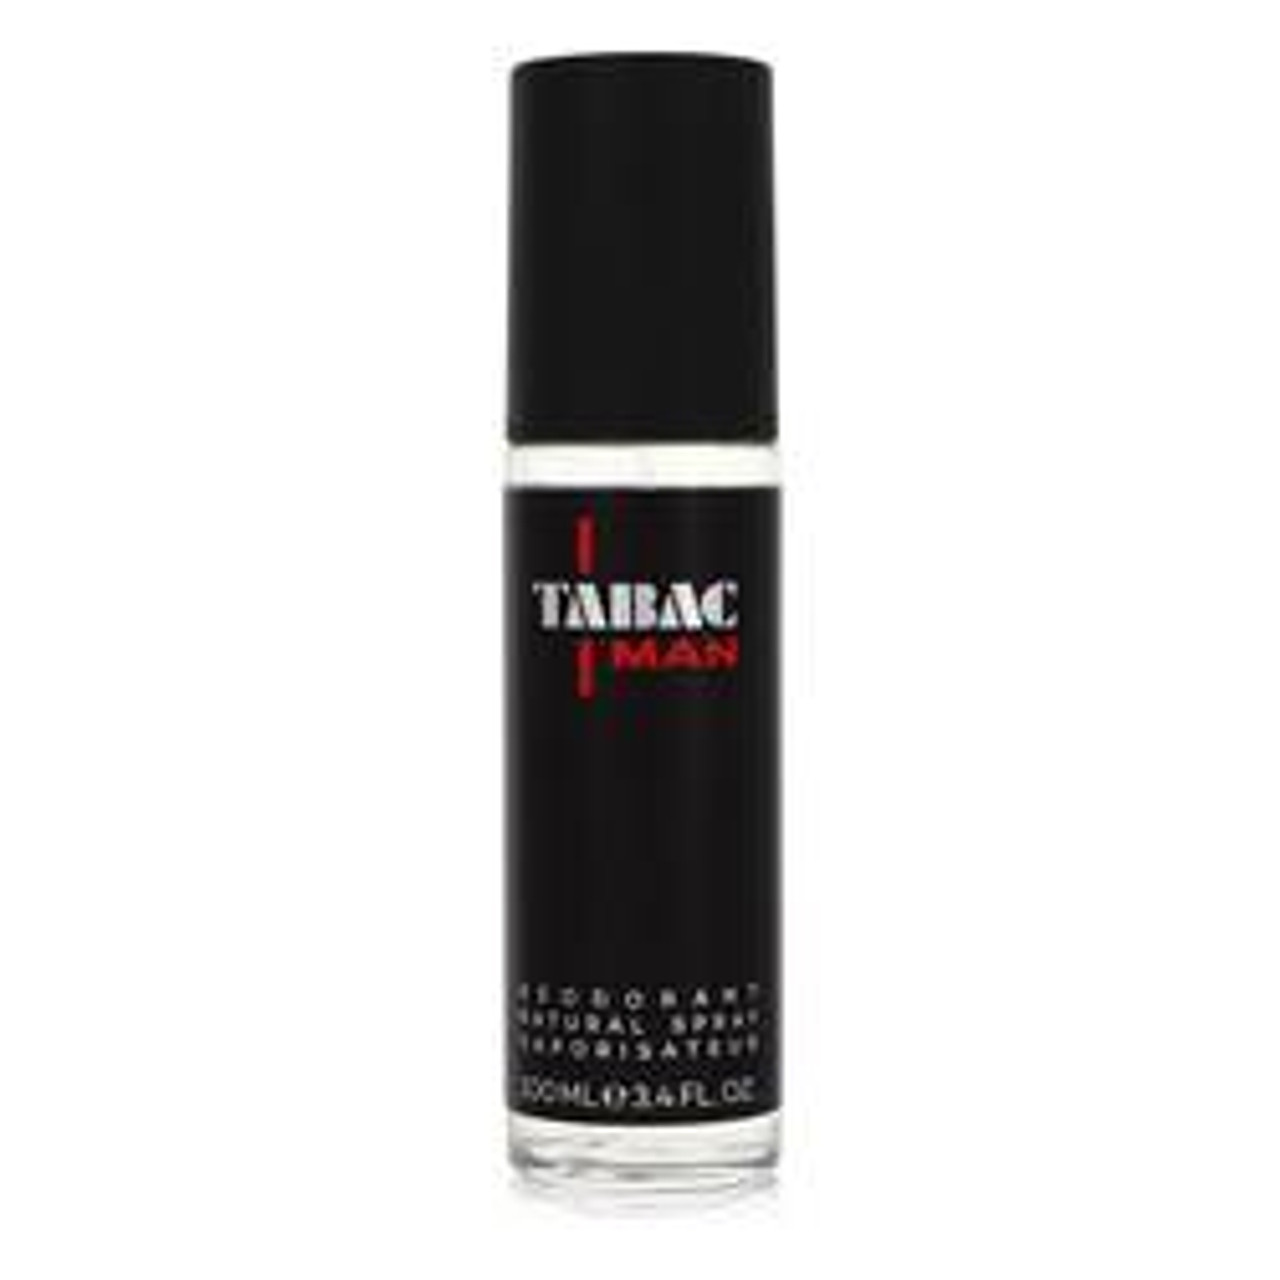 Tabac Man Cologne By Maurer & Wirtz Deodorant Spray 3.4 oz for Men - [From 47.00 - Choose pk Qty ] - *Ships from Miami